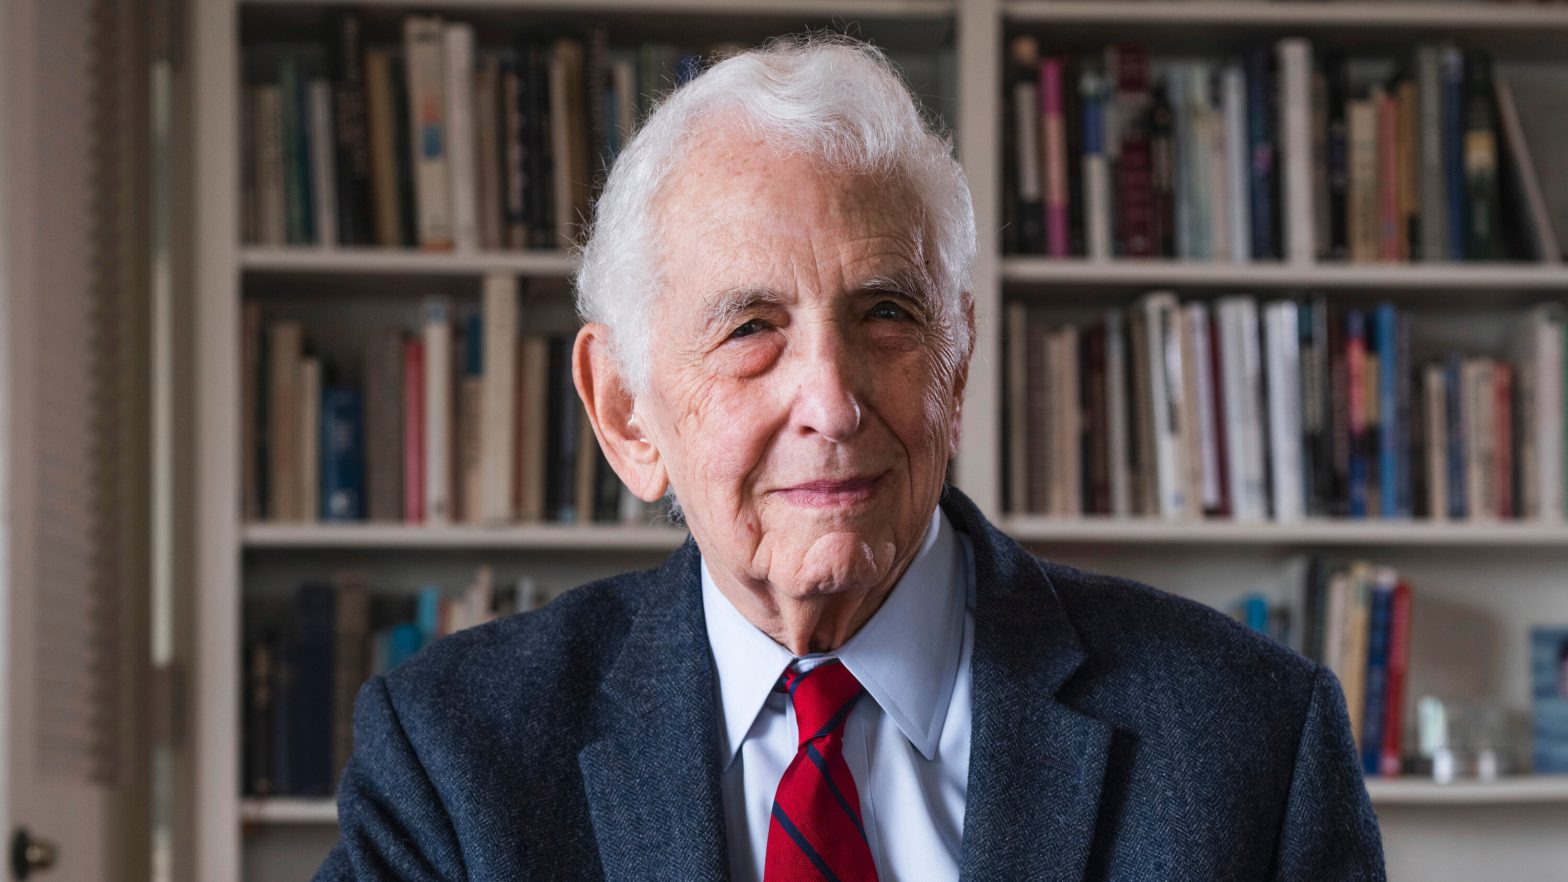 What were Pentagon Papers? What role did Daniel Ellsberg play in them?